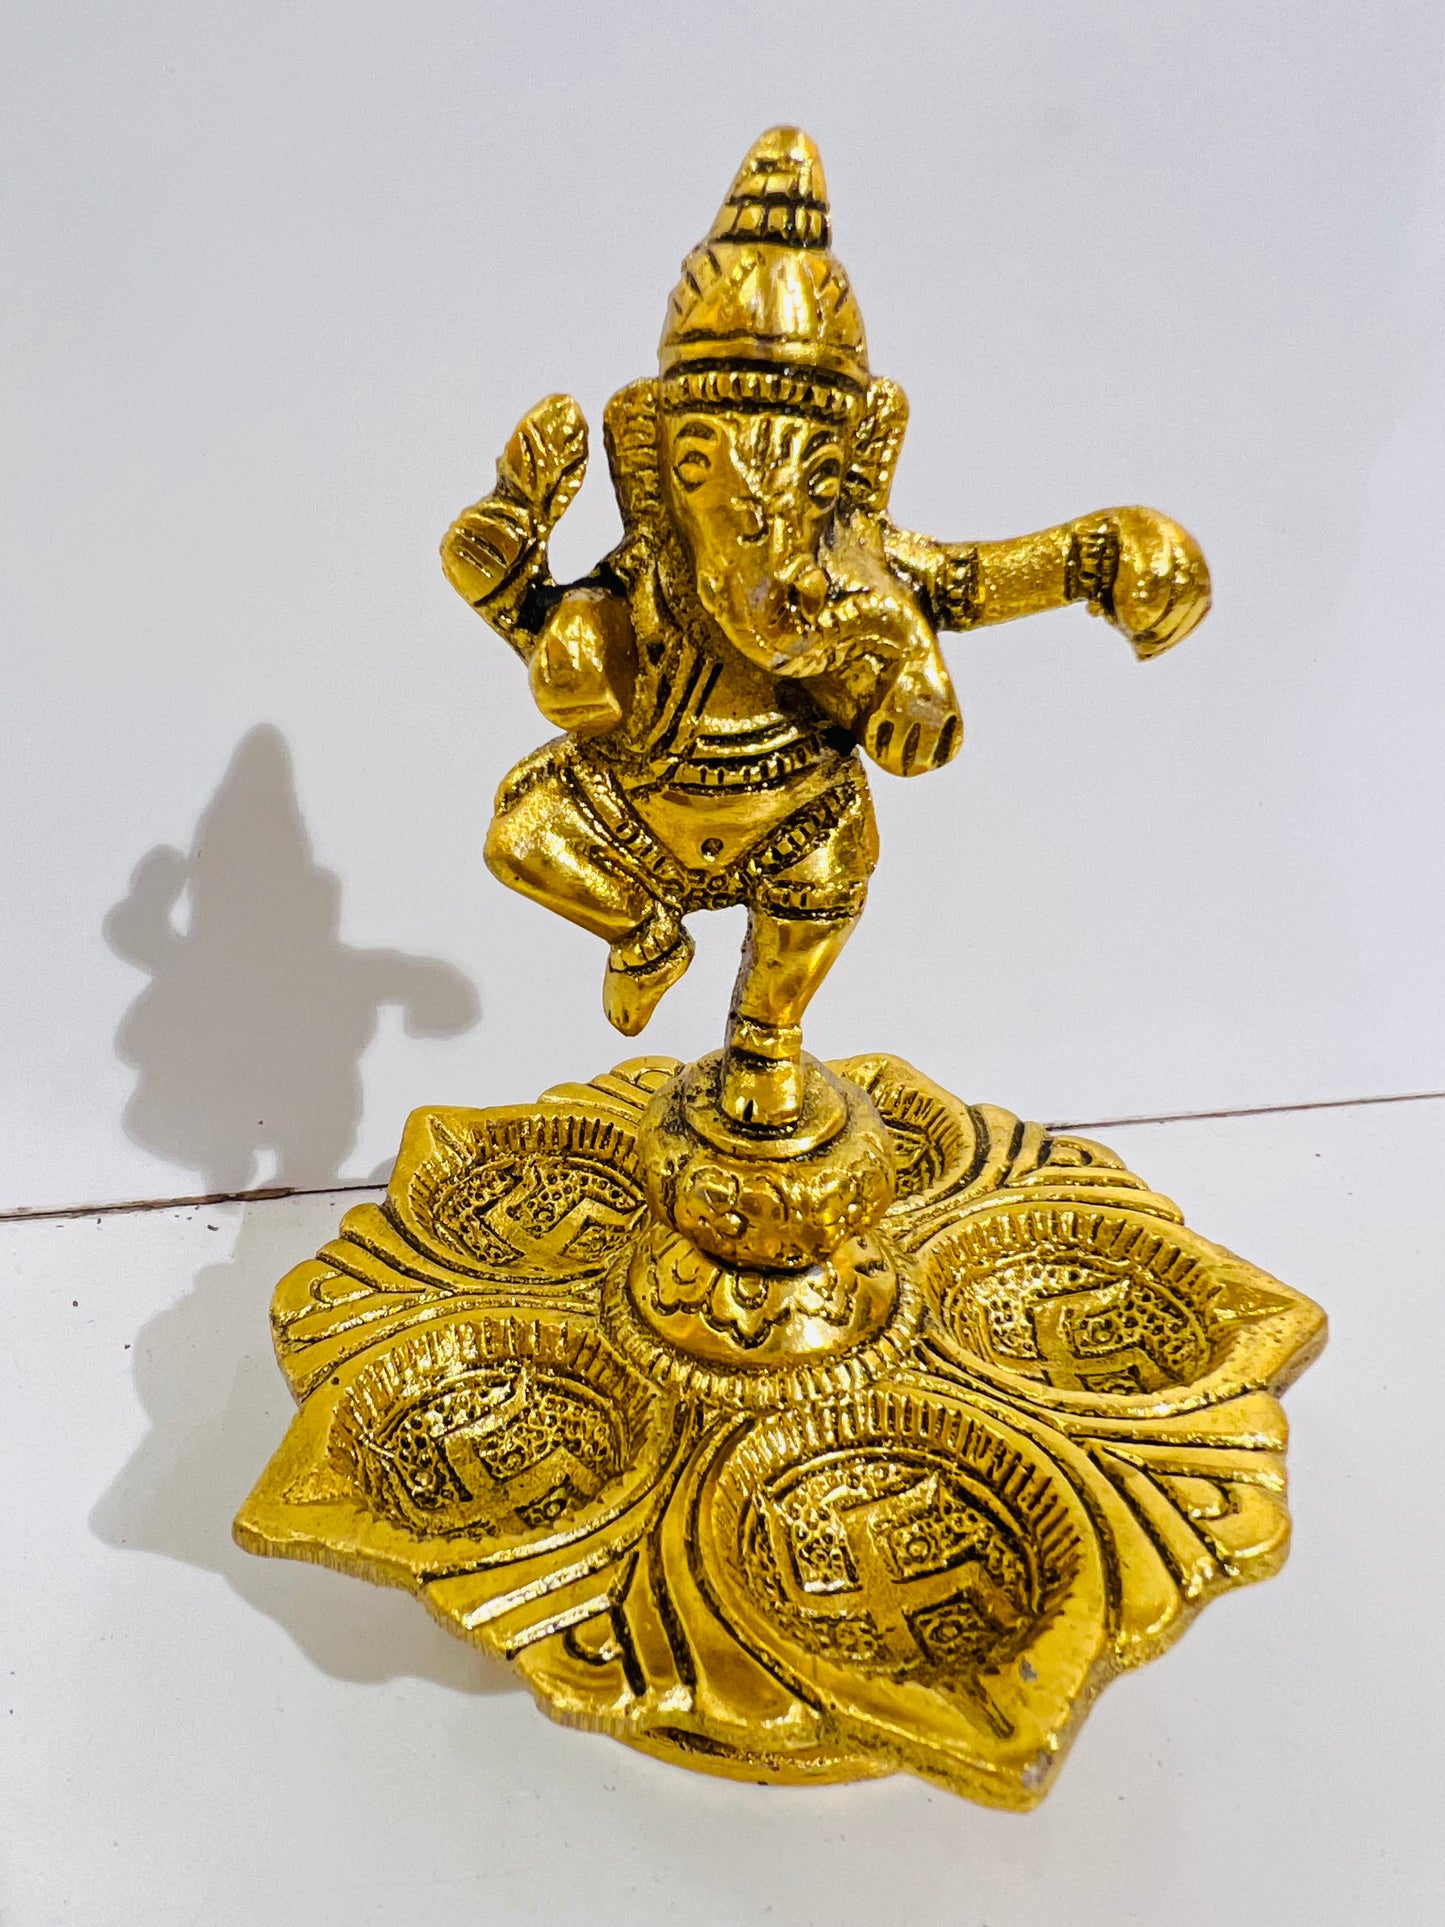 CHANDNI COLLECTION Metal Dancing Ganesh Diya with 5 Wick Holder with Stand for Pooja Room Diwali Home Decoration Antique Lord Ganesha Diya for Temple Oil Lamp Showpiece (Golden)